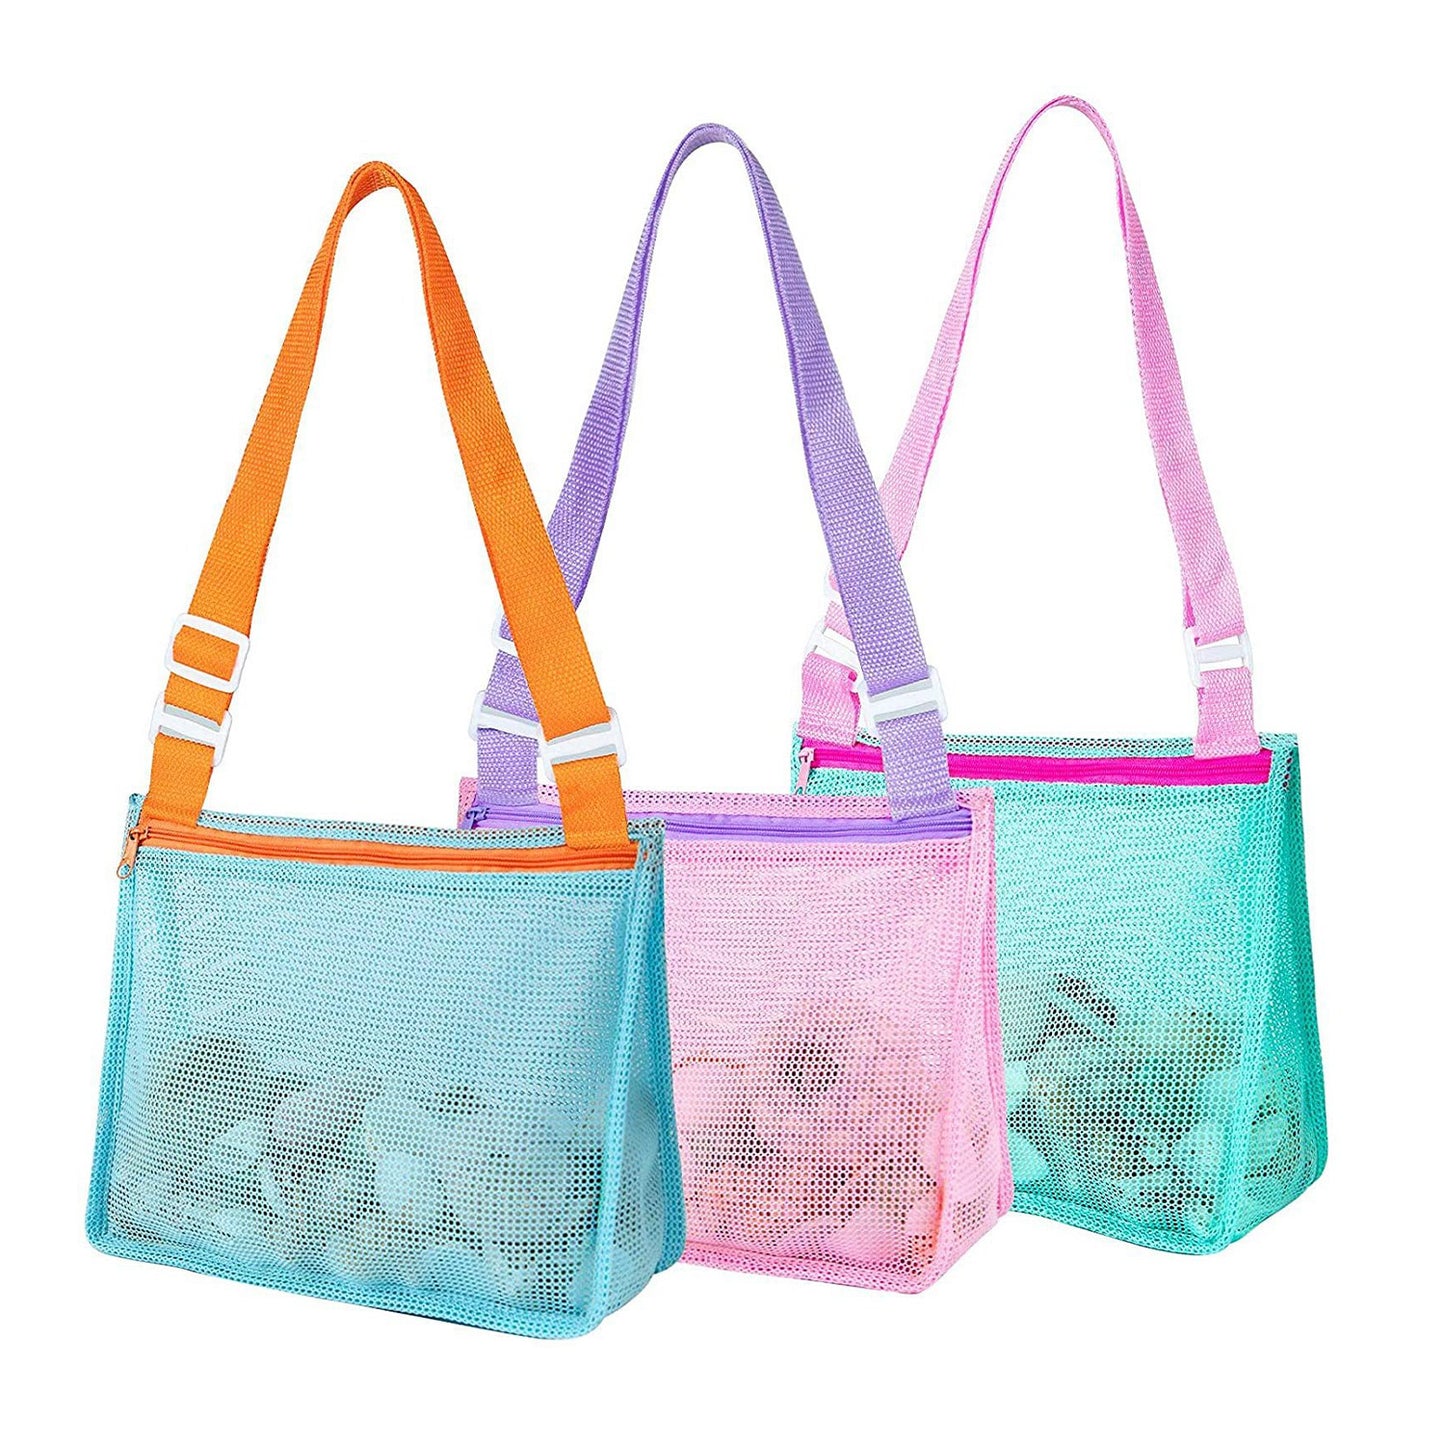 3Pcs Beach Mesh Bags Seashell Sand Toys Collecting Tote Bags with Adjustable Straps for Boys Girls - Multi -